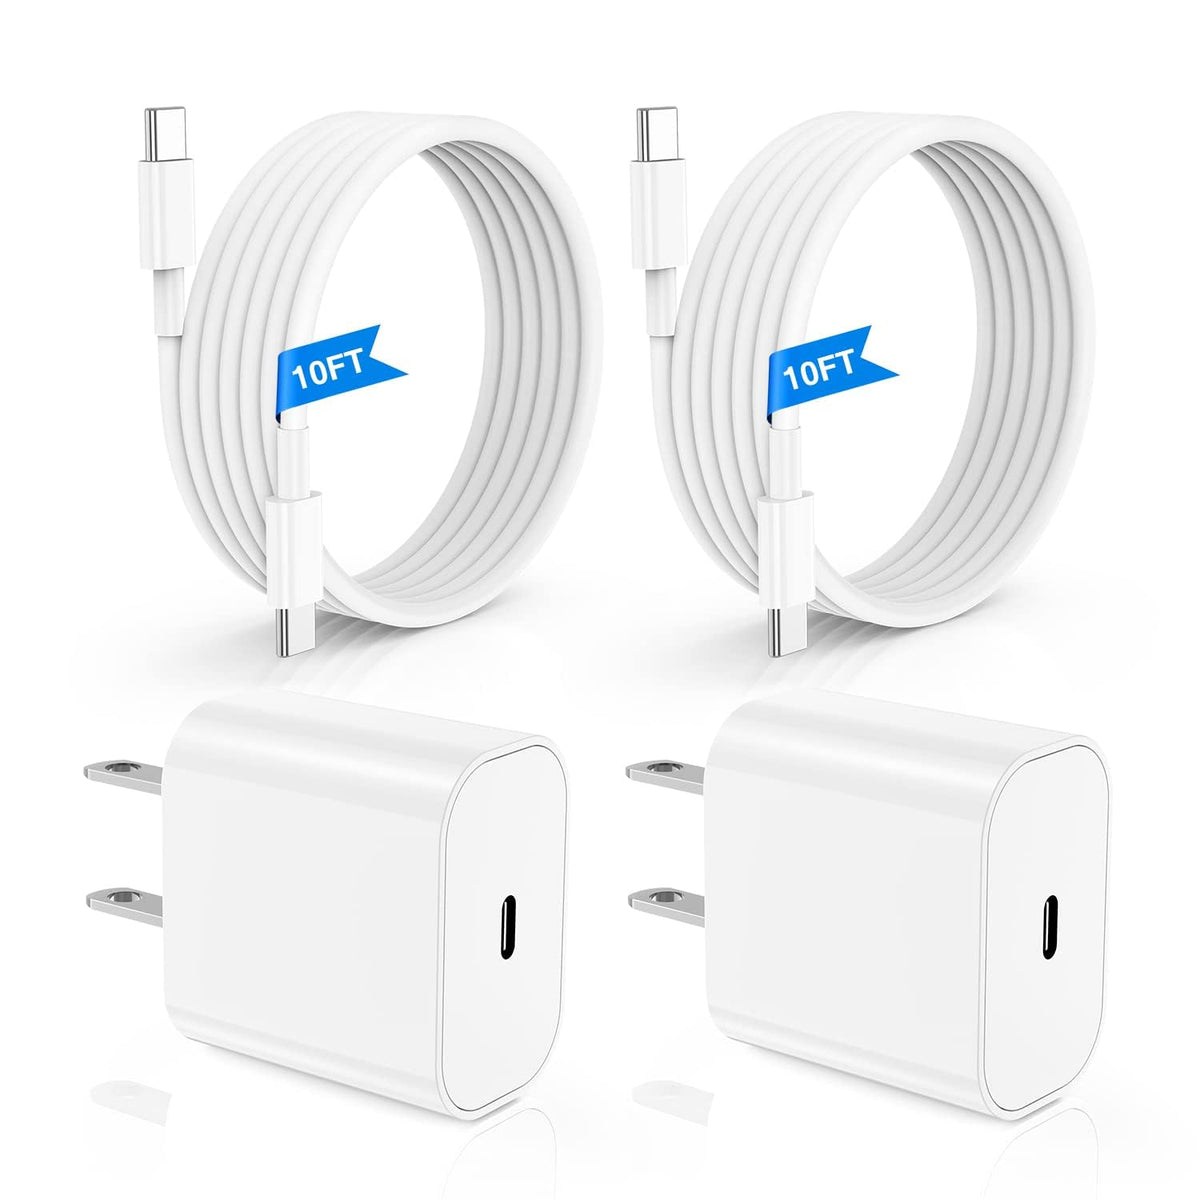 iPhone 15 Fast Charger 10ft,USB C Charging Block and Long Type C to C Cable Cord,iPad Pro Wall Plug Power Adapter Cube Brick for Apple 15 Plus/15 Pro Max/12.9/11 inch/iPad Air/Mini/4/5th/6 Generation